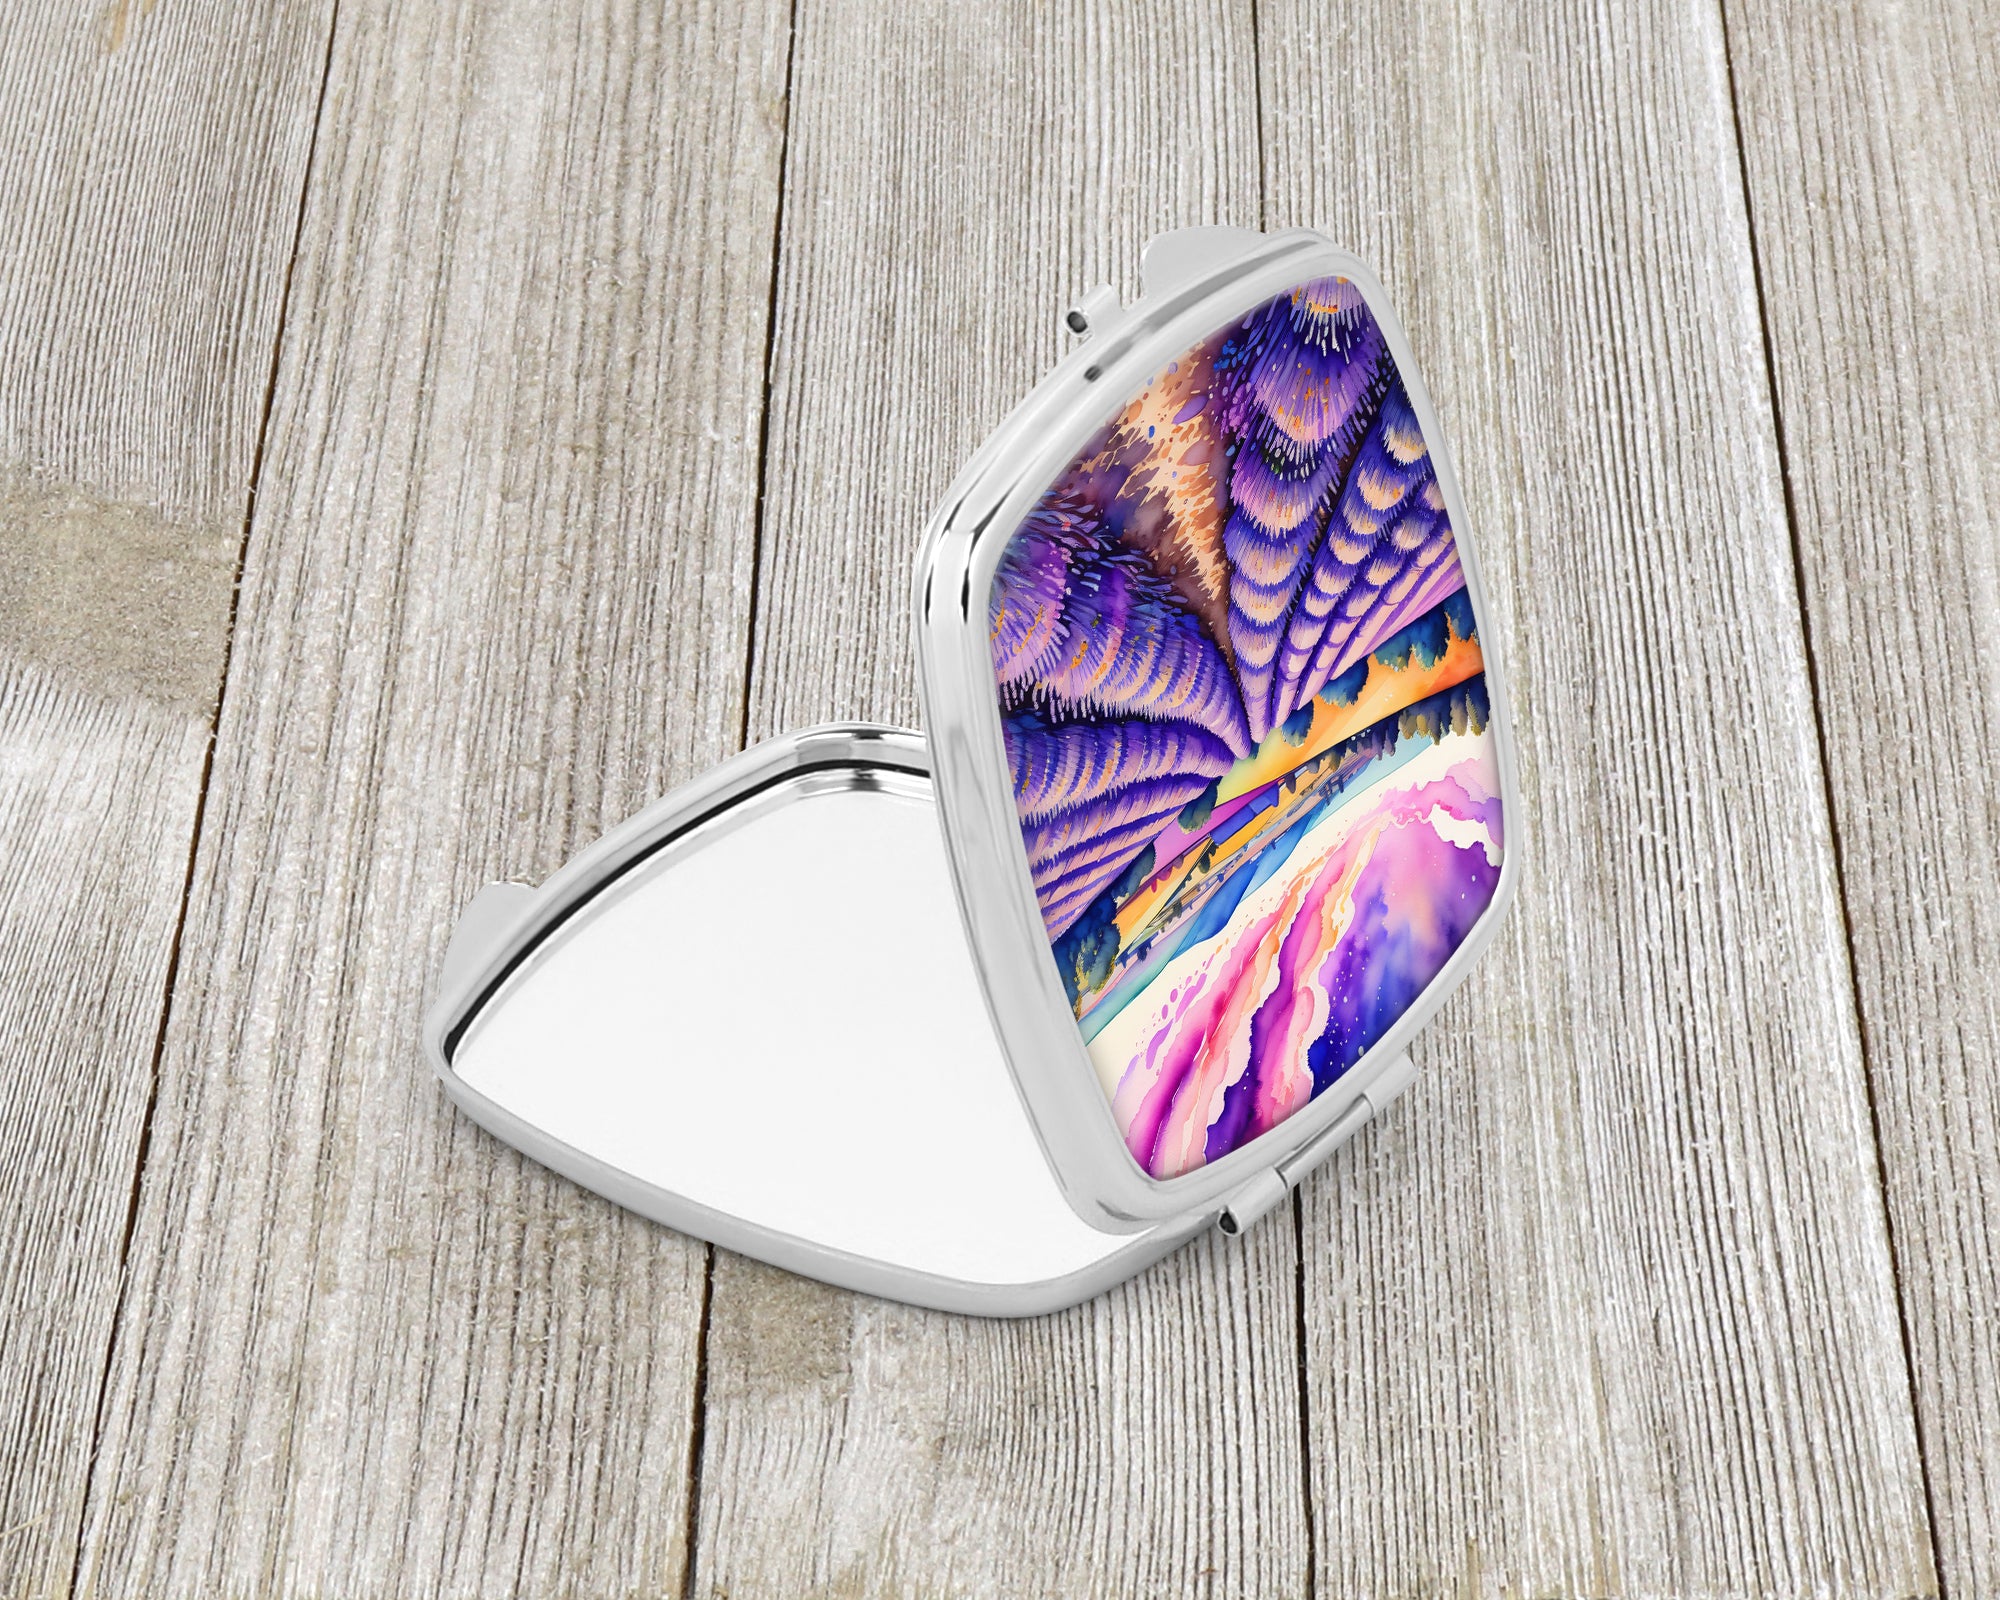 Buy this Colorful English Lavender Compact Mirror